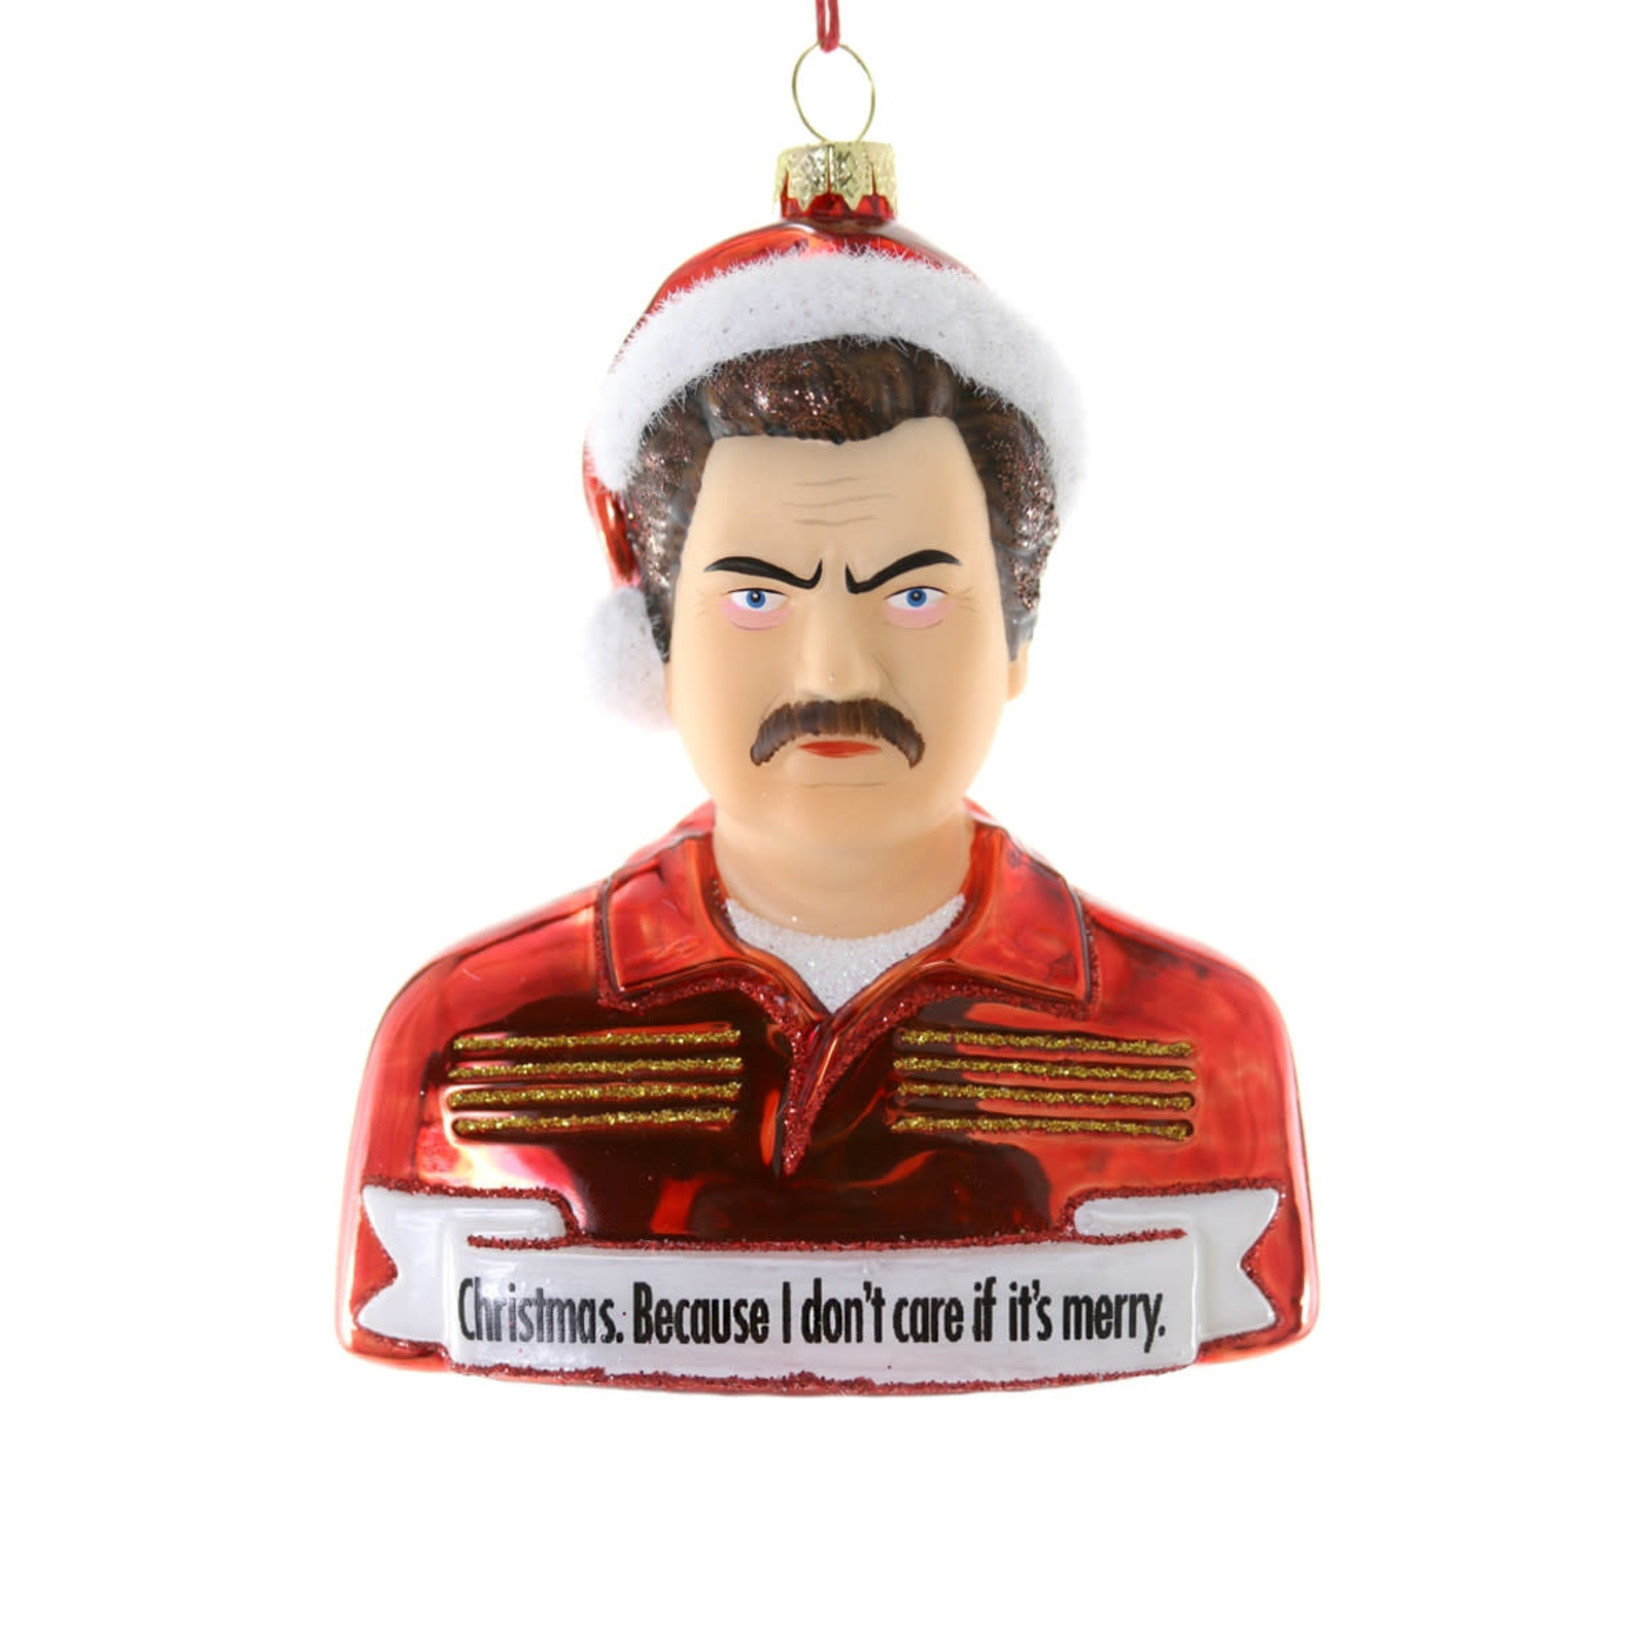 Ornament - Ron Swanson - "Christmas, Because I Don't Care If It's Merry"